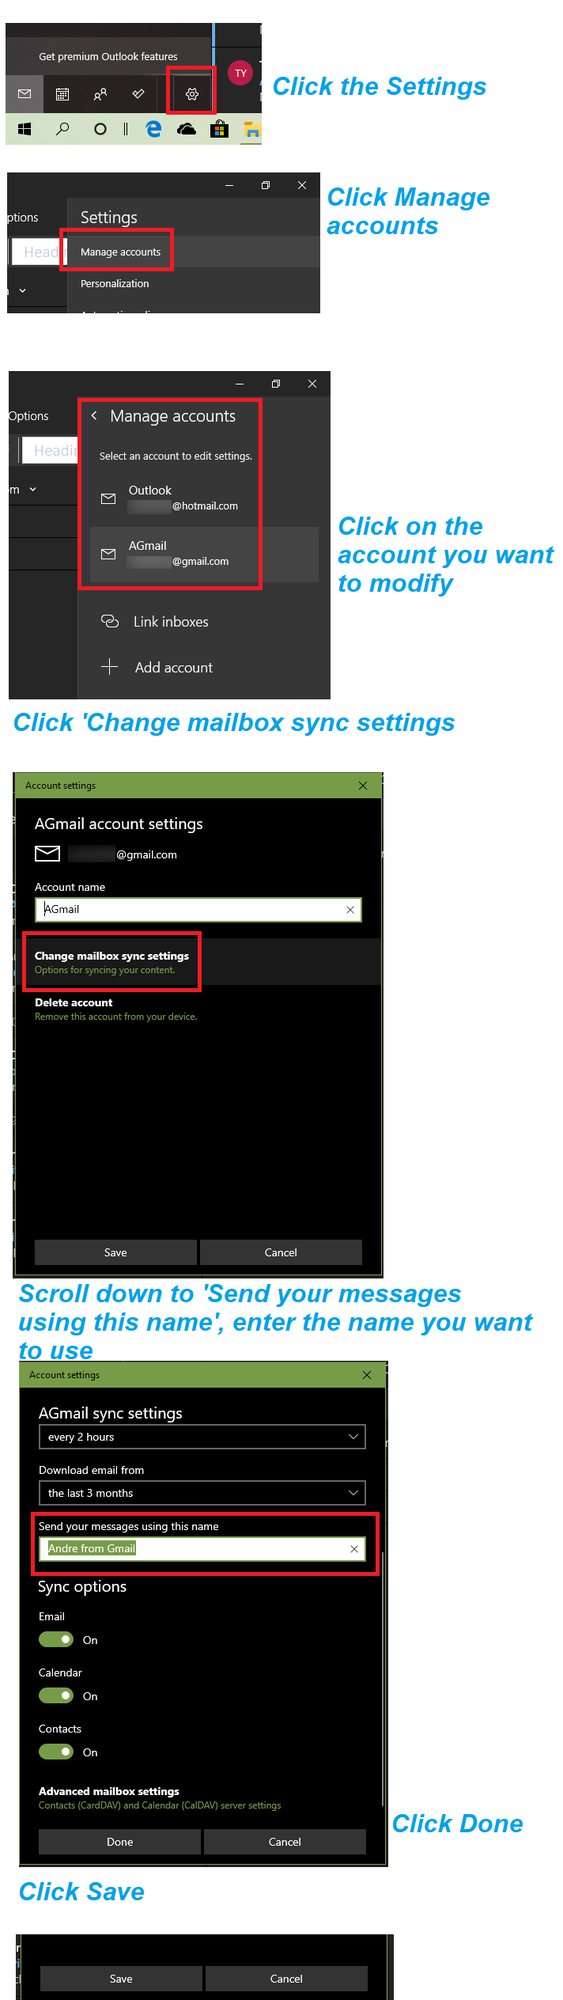 Easy Guide: How to Change Account Name in Windows Mail in Windows 10 4a430c48-5d83-491c-ae95-b0efdb628265?upload=true.png